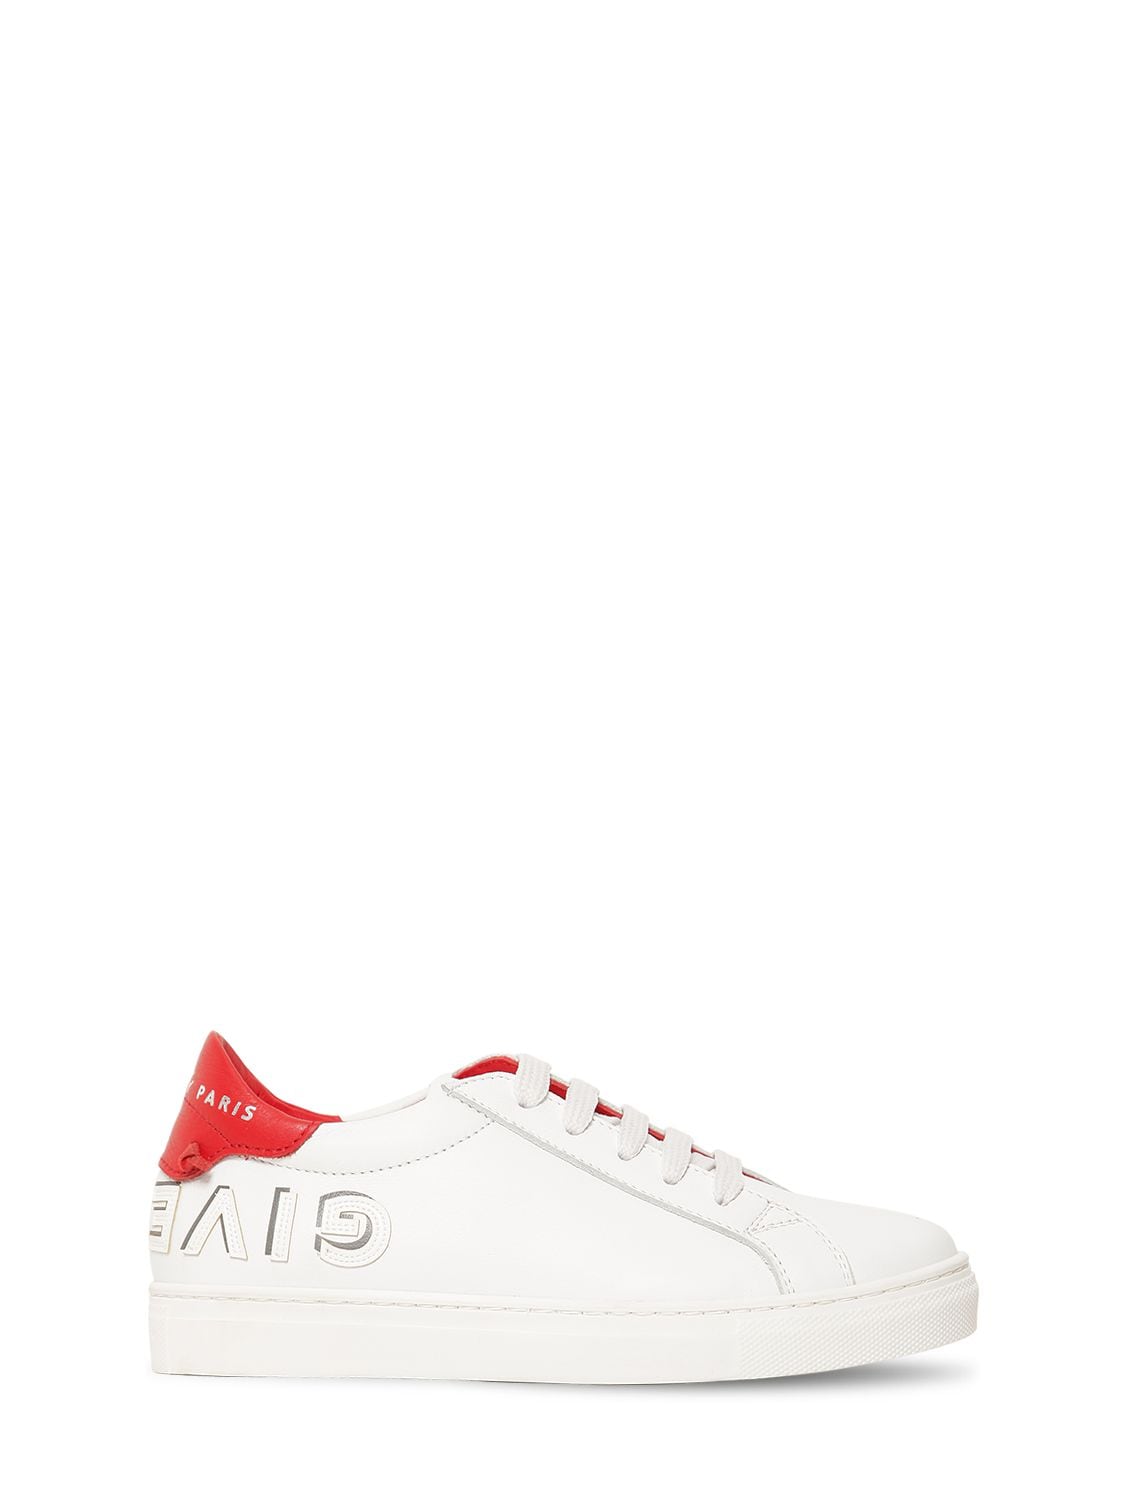 GIVENCHY EMBROIDERED LOGO LEATHER SNEAKERS,70IOFL093-MTBC0